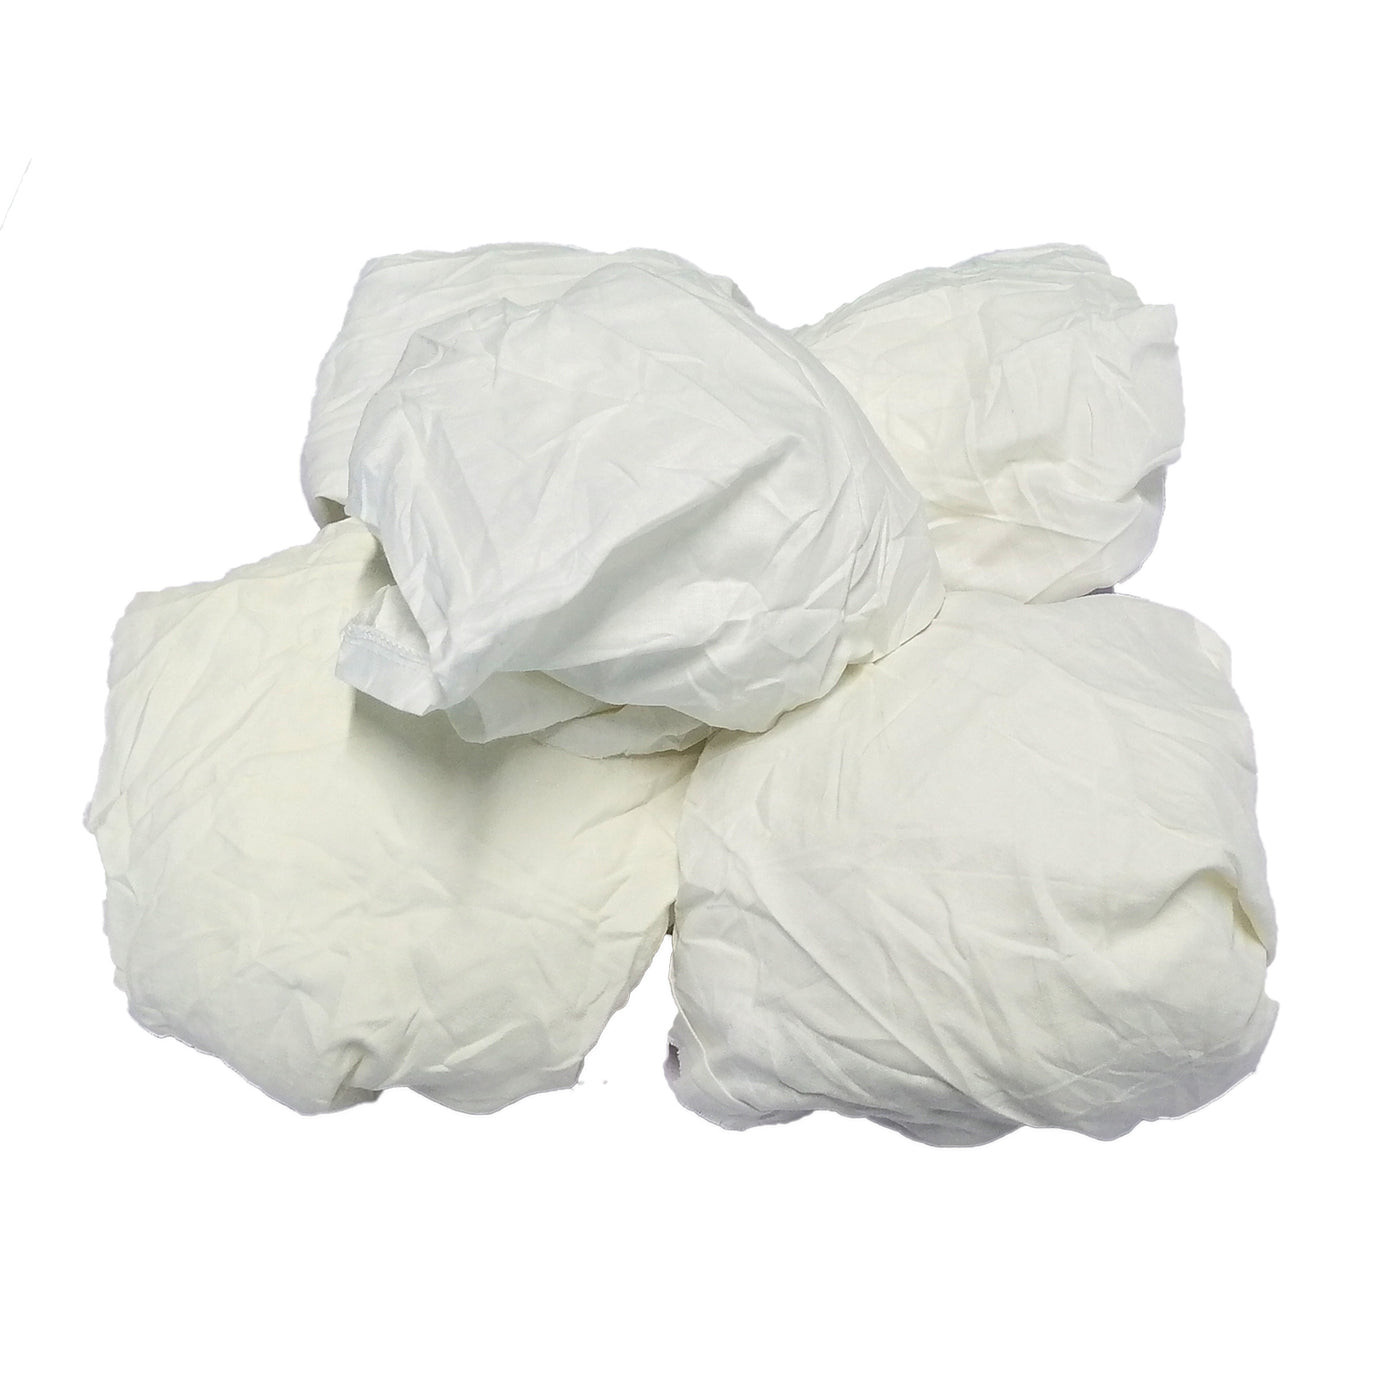 1kg Bag 100% Cotton Sheet Lint-Free Cleaning Rags / Wipers / Cloths (Bag of  Rag)